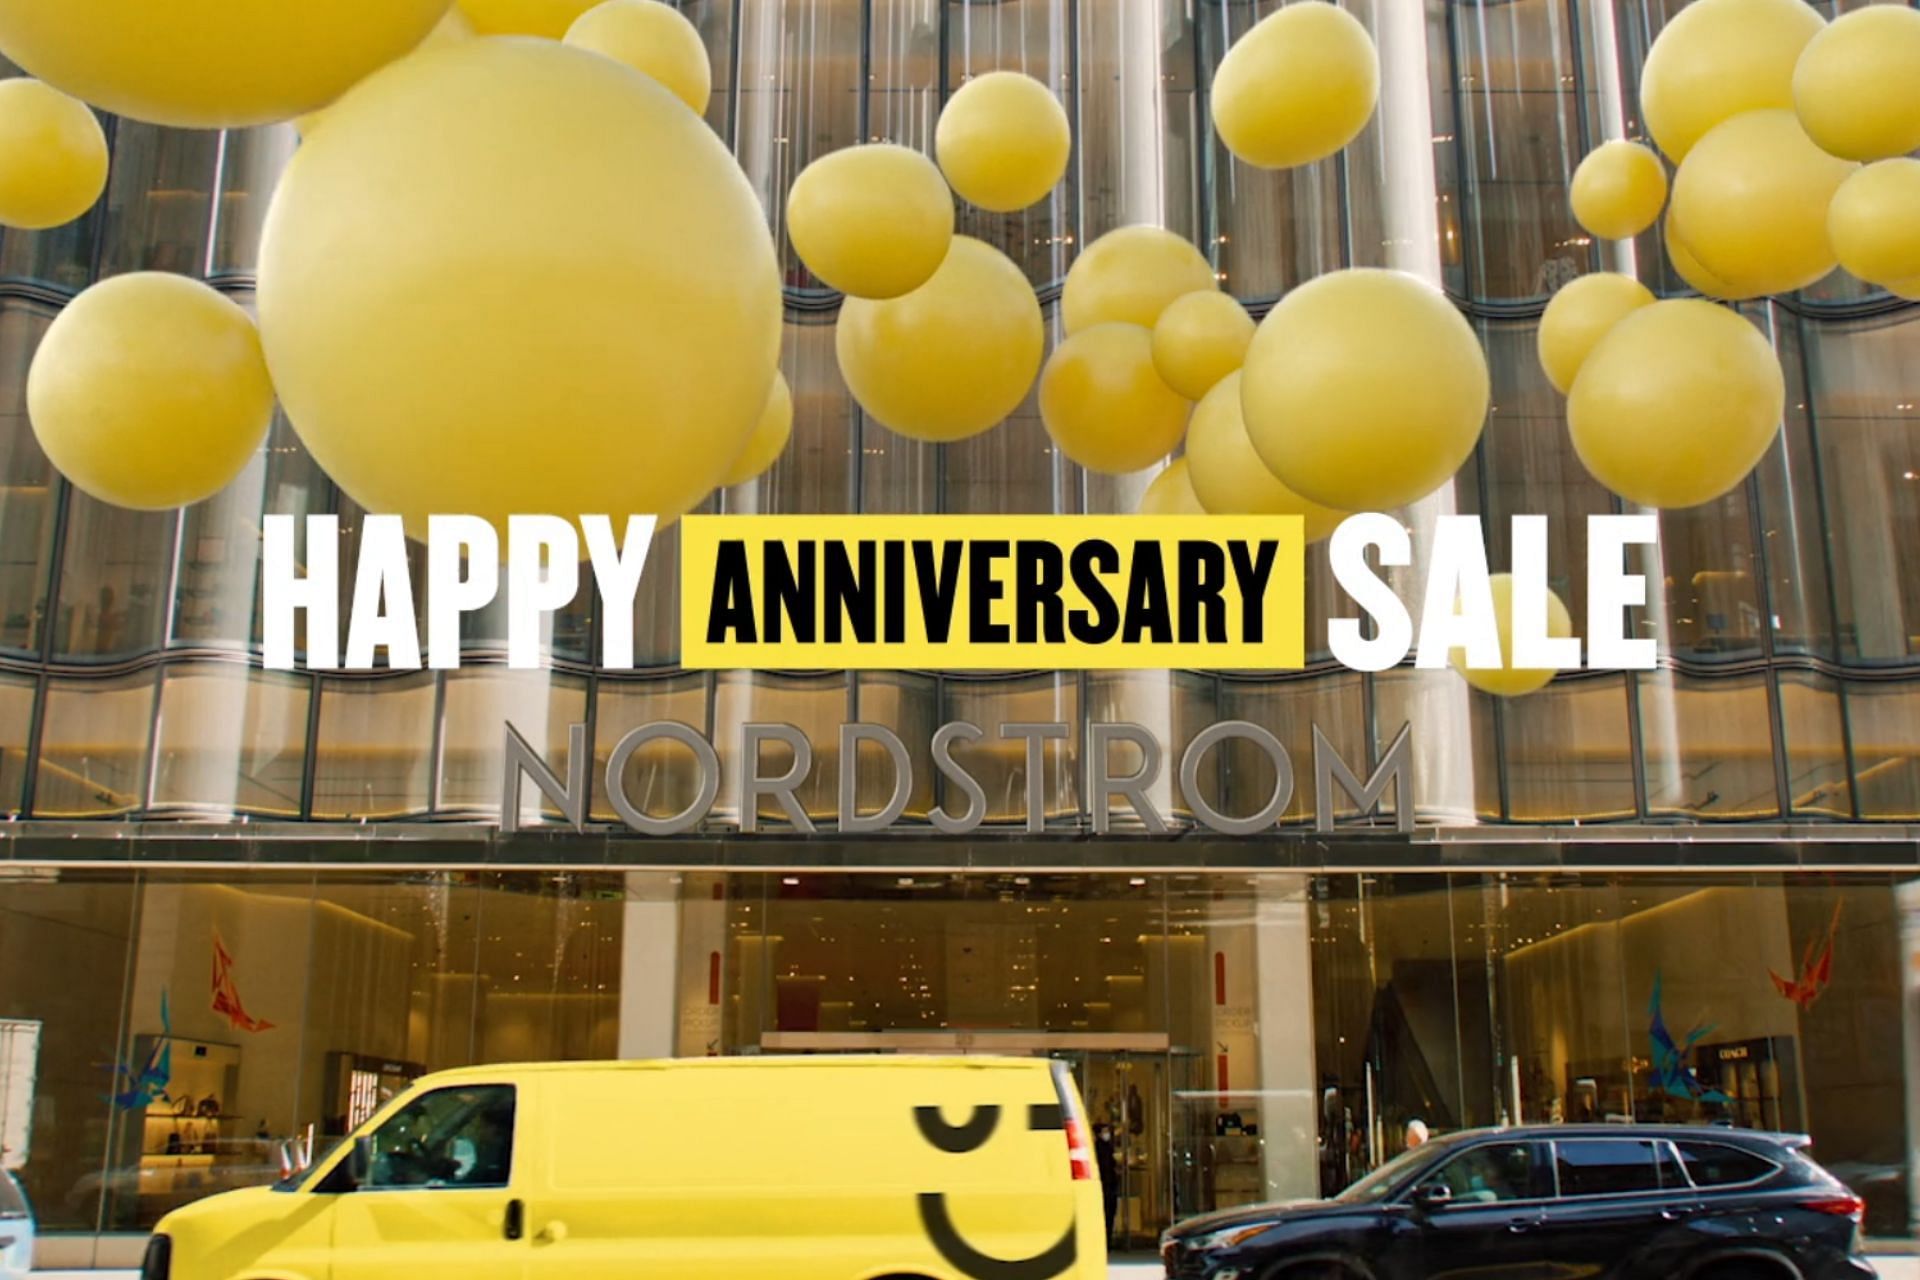 When is the last date of the Nordstrom Anniversary Sale 2022? Details